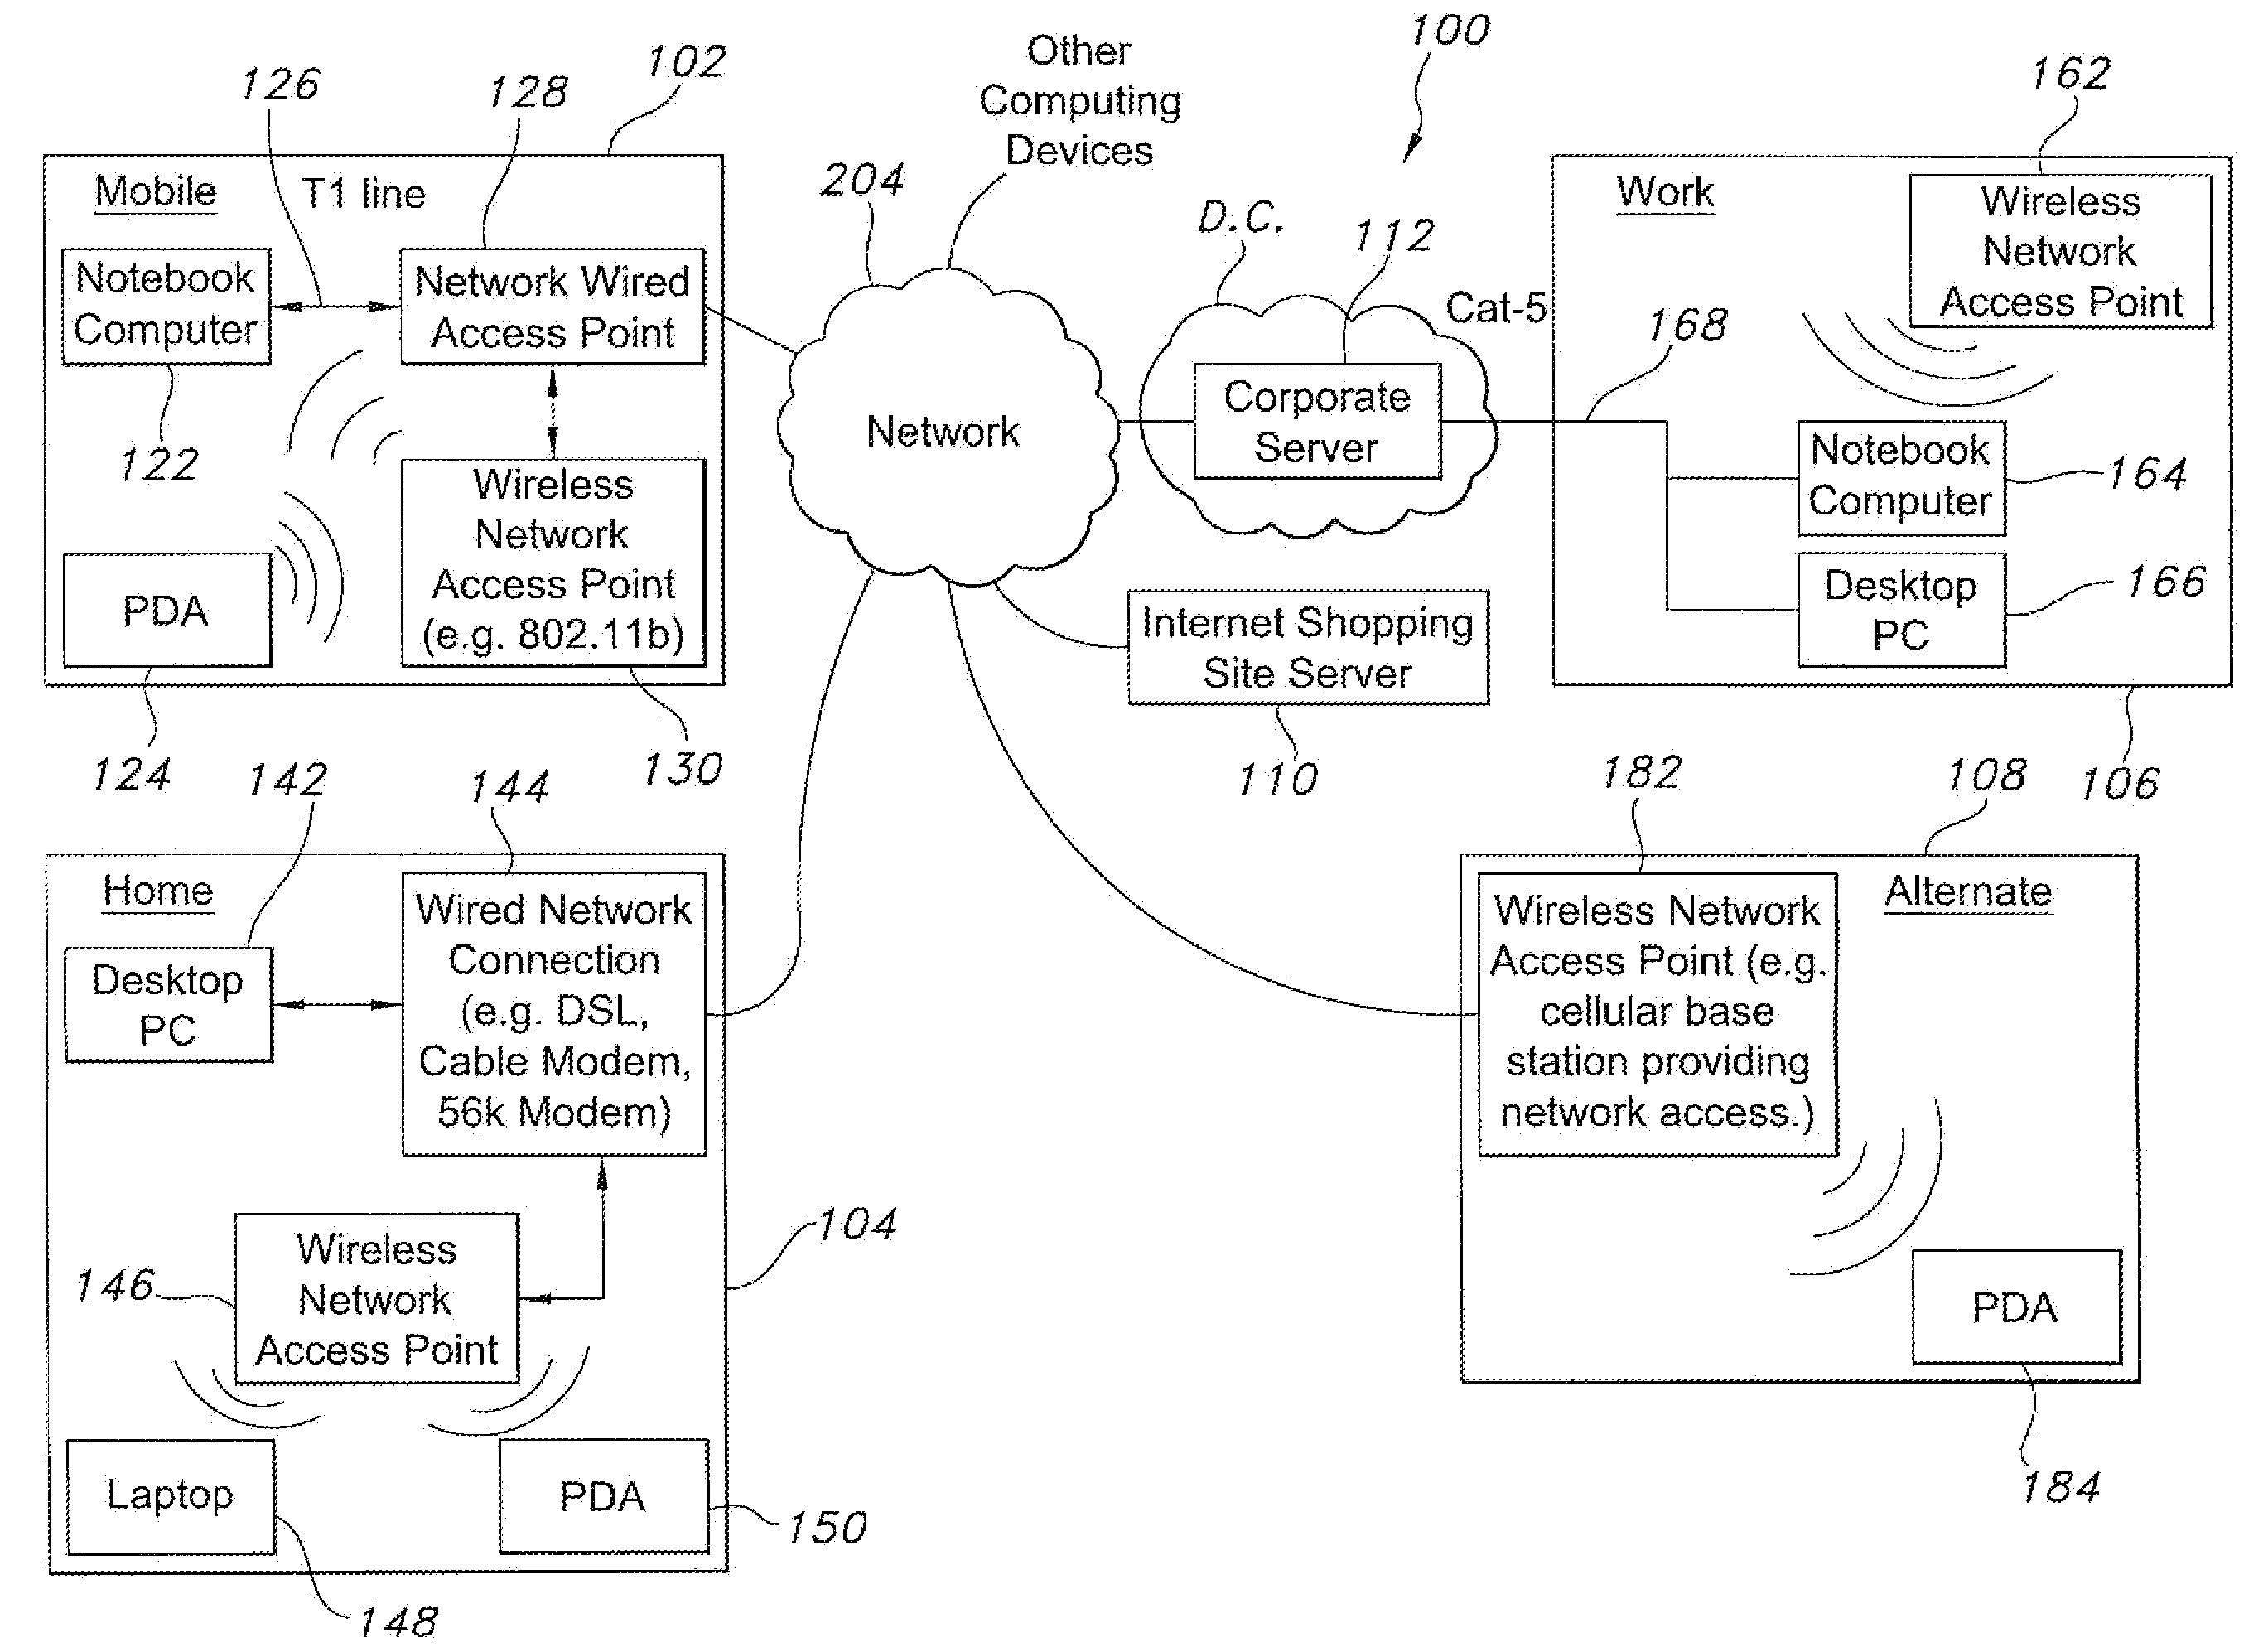 Securing a network connection by way of an endpoint computing device